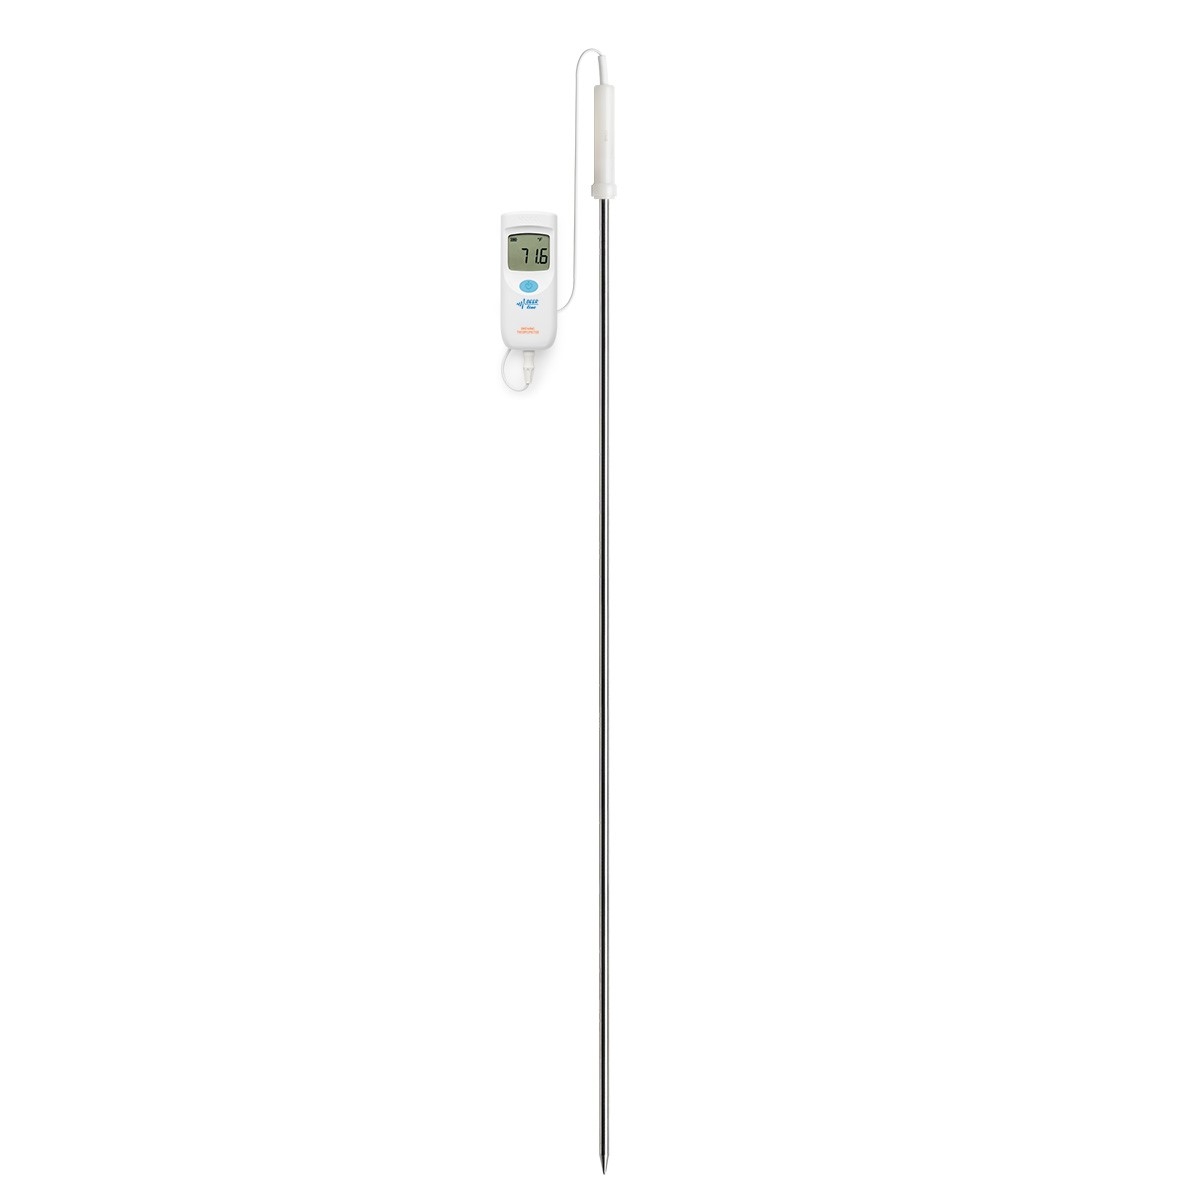 Brewing Thermometer - HI935012